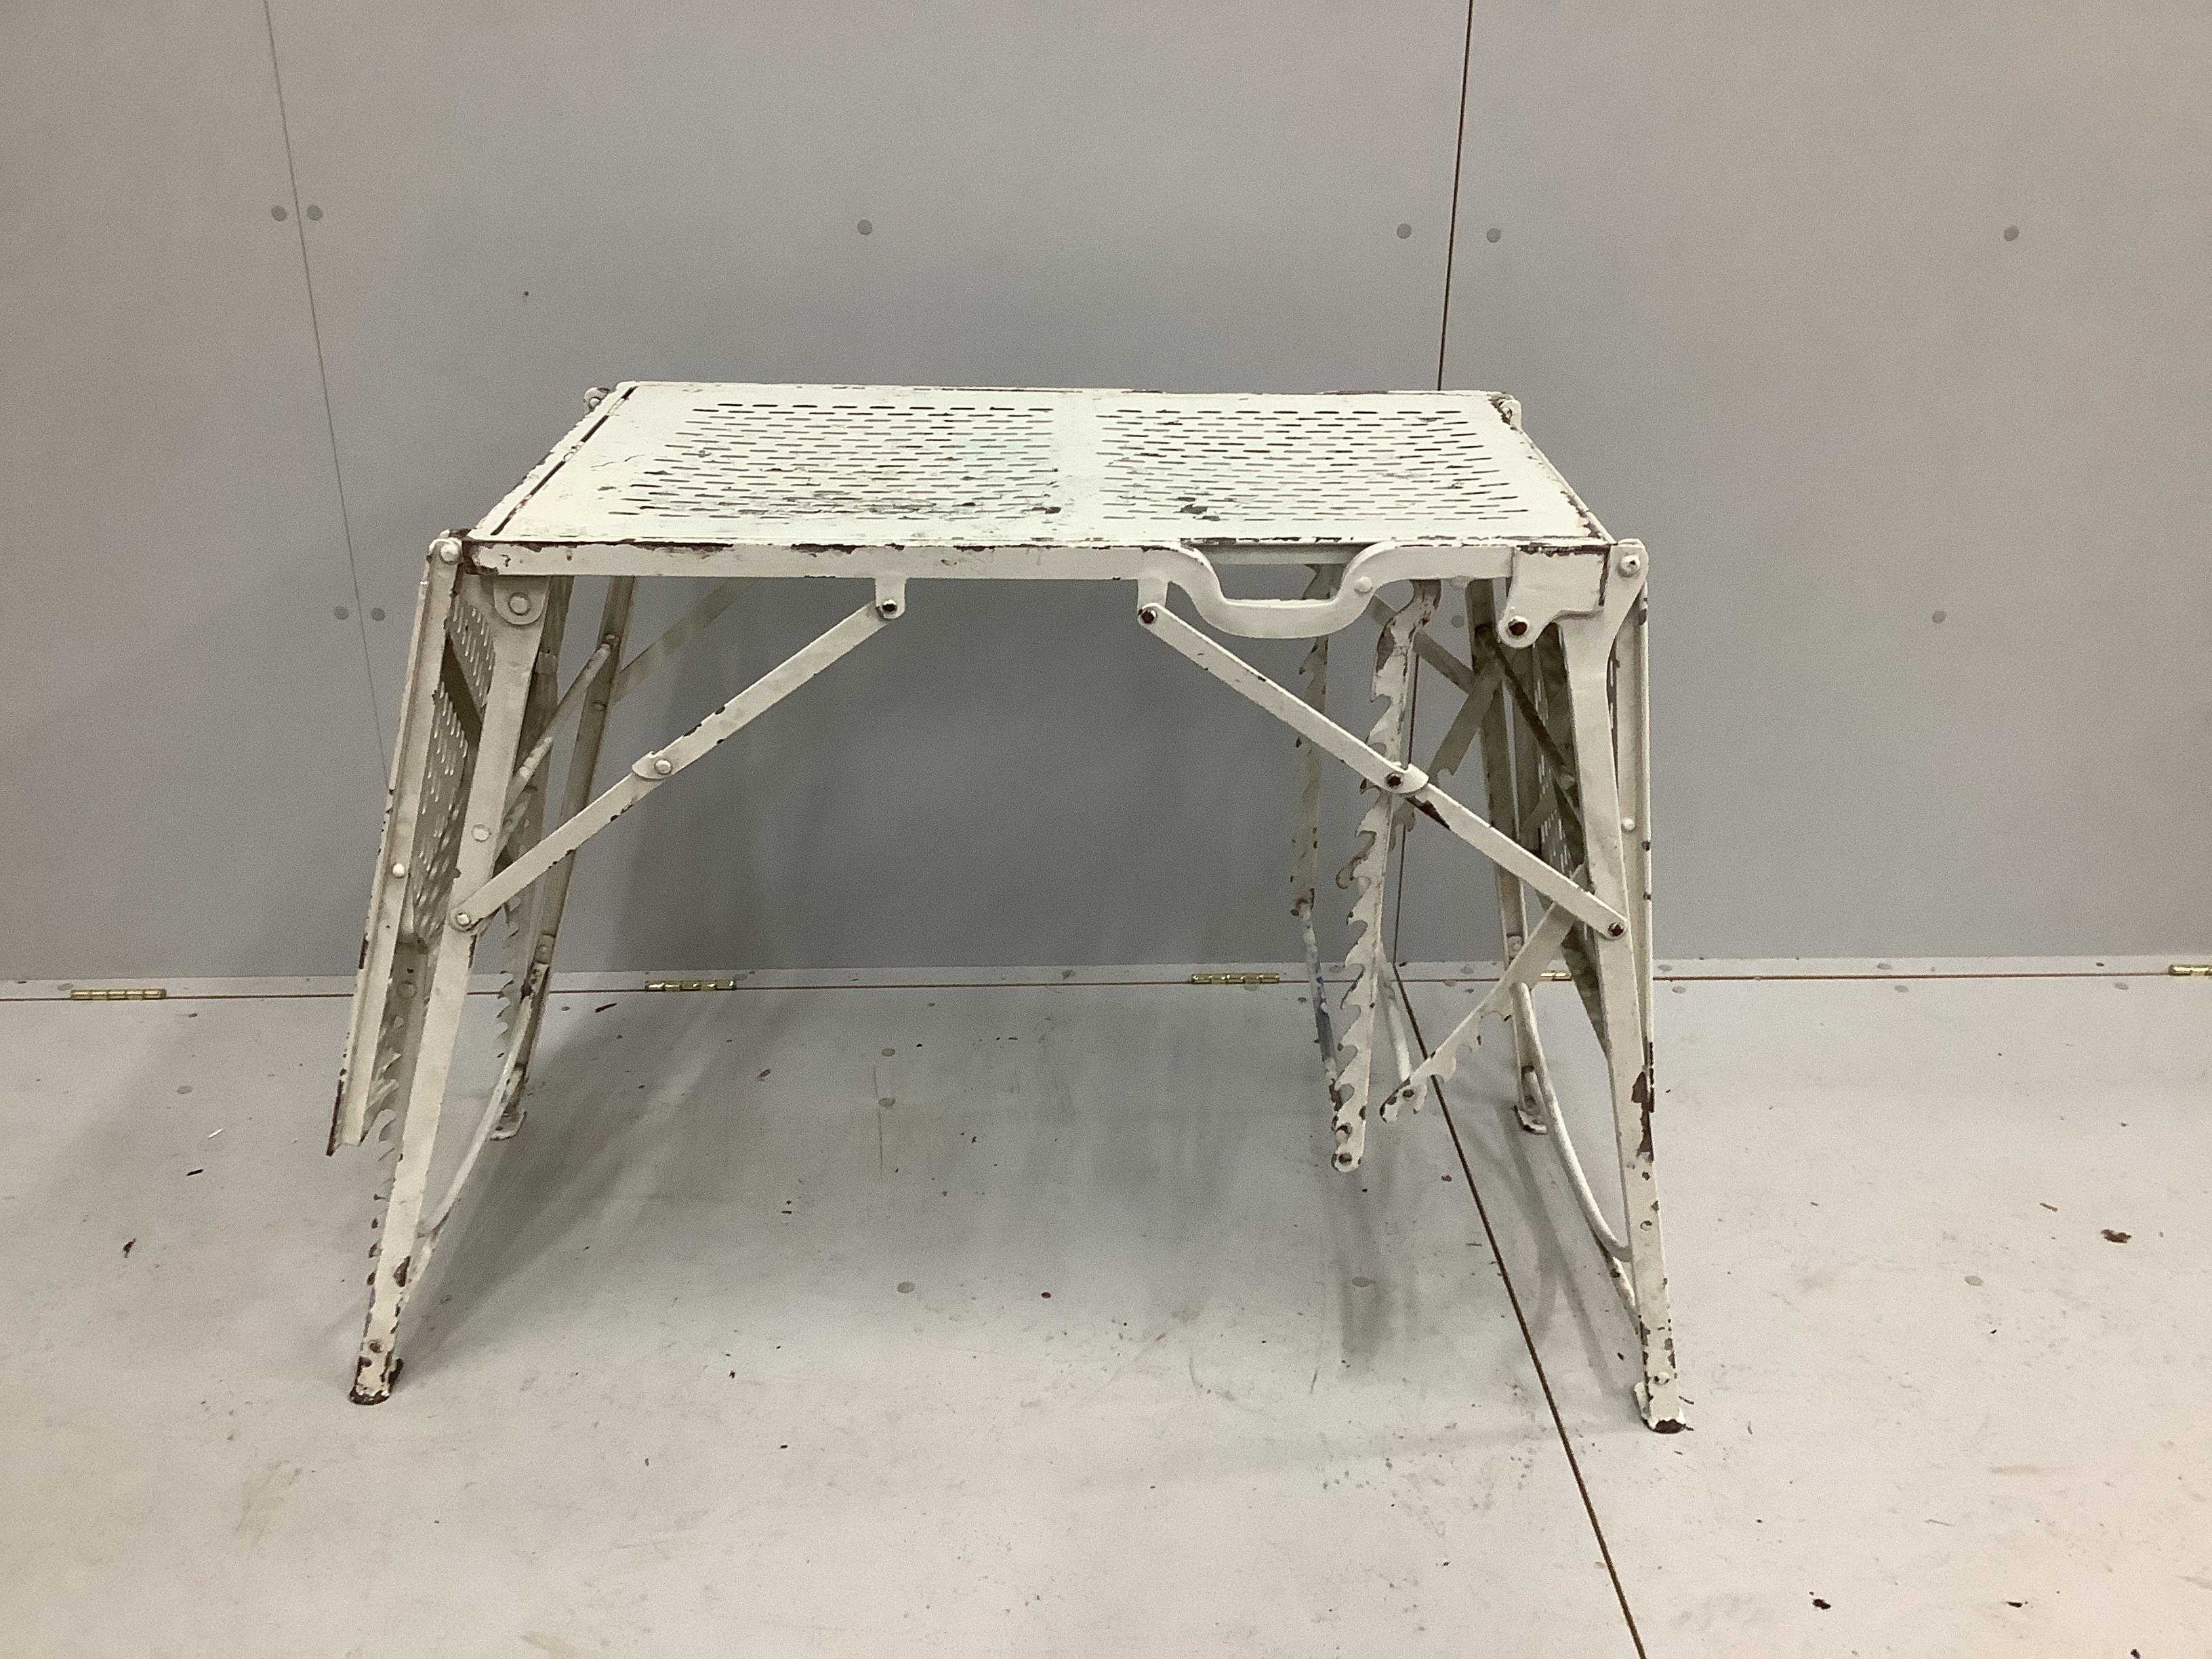 A vintage metal doctor's examination table